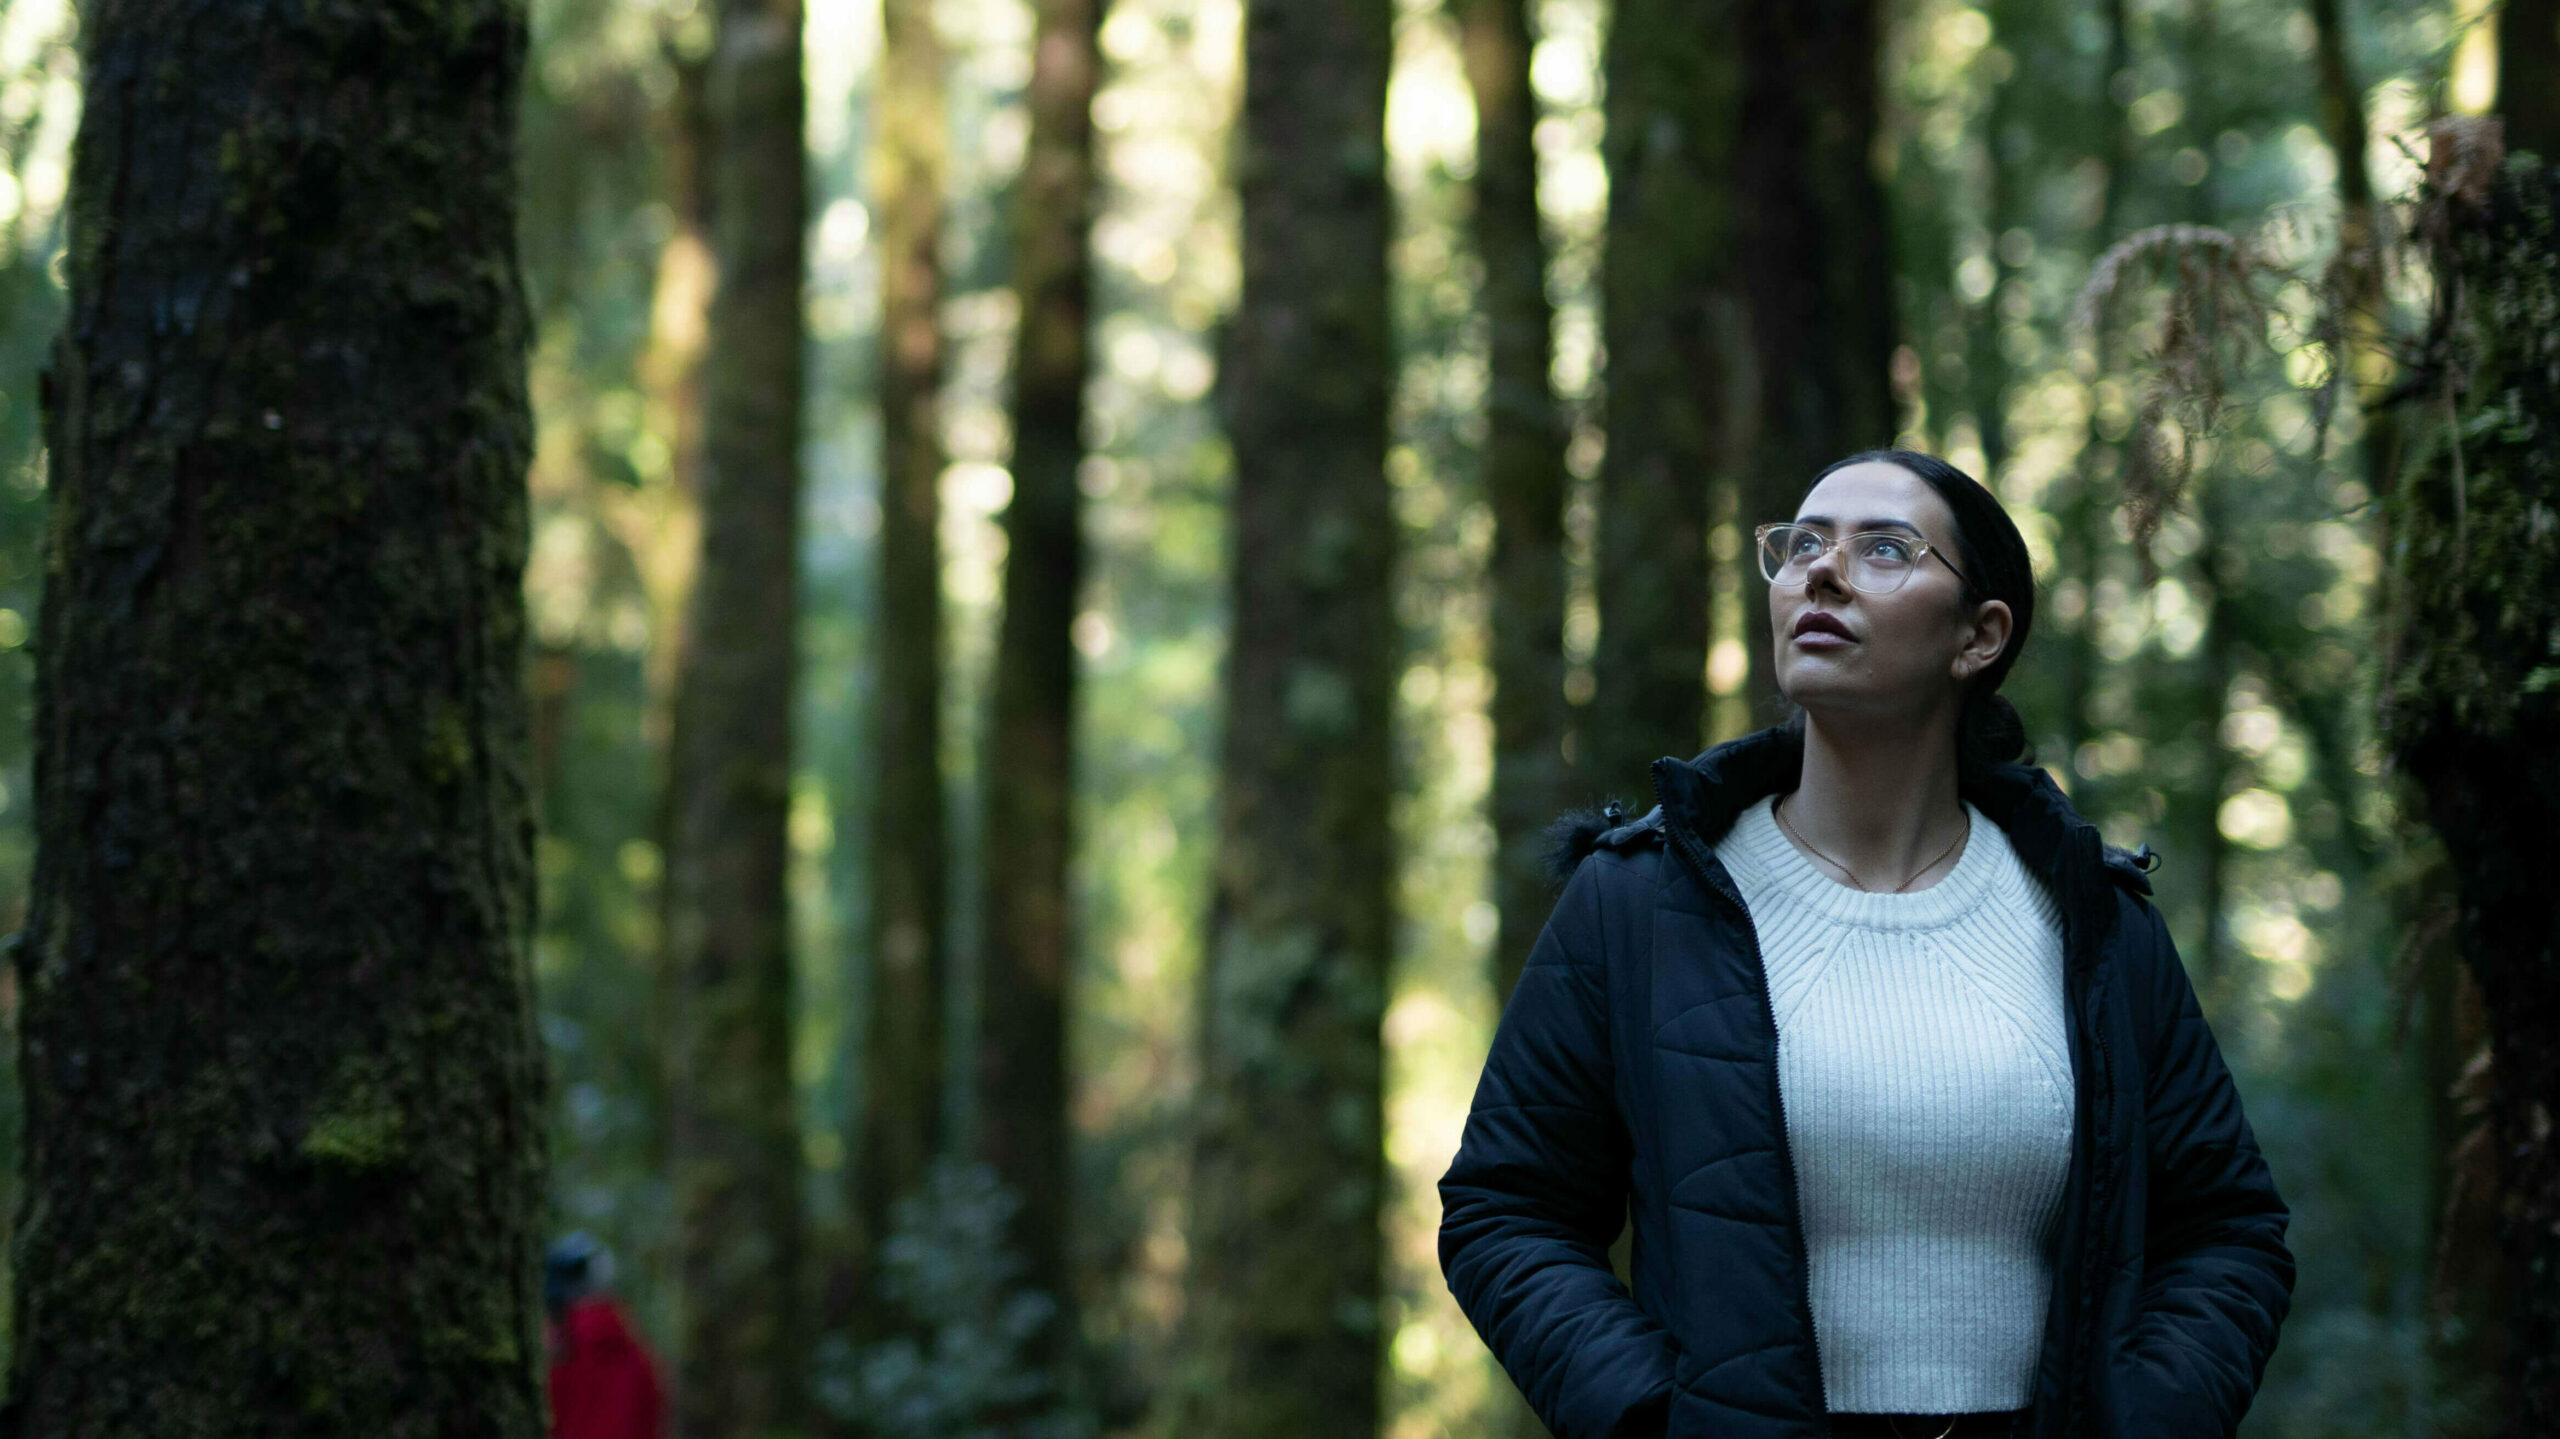 A woman wearing a black parka jacket over a knitted white t-shirt. She wears glasses and is gazing upwards while walking through the rainforest. She is surrounded by tall trees.